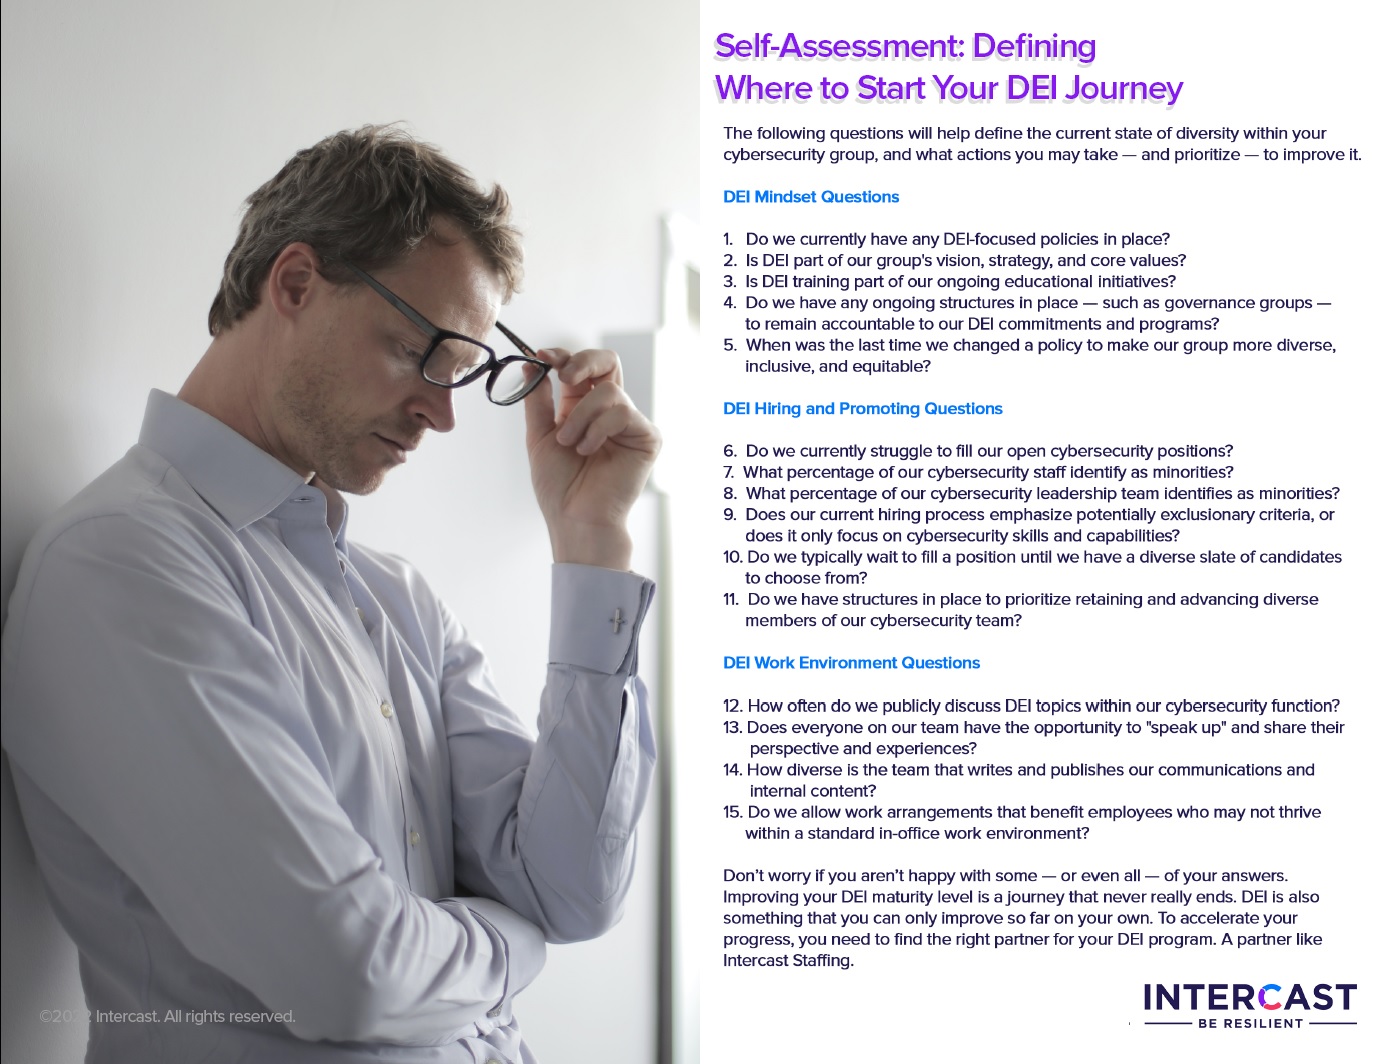 self-Assessment can help you identify where you have greatest opportunity to improve your DEI program